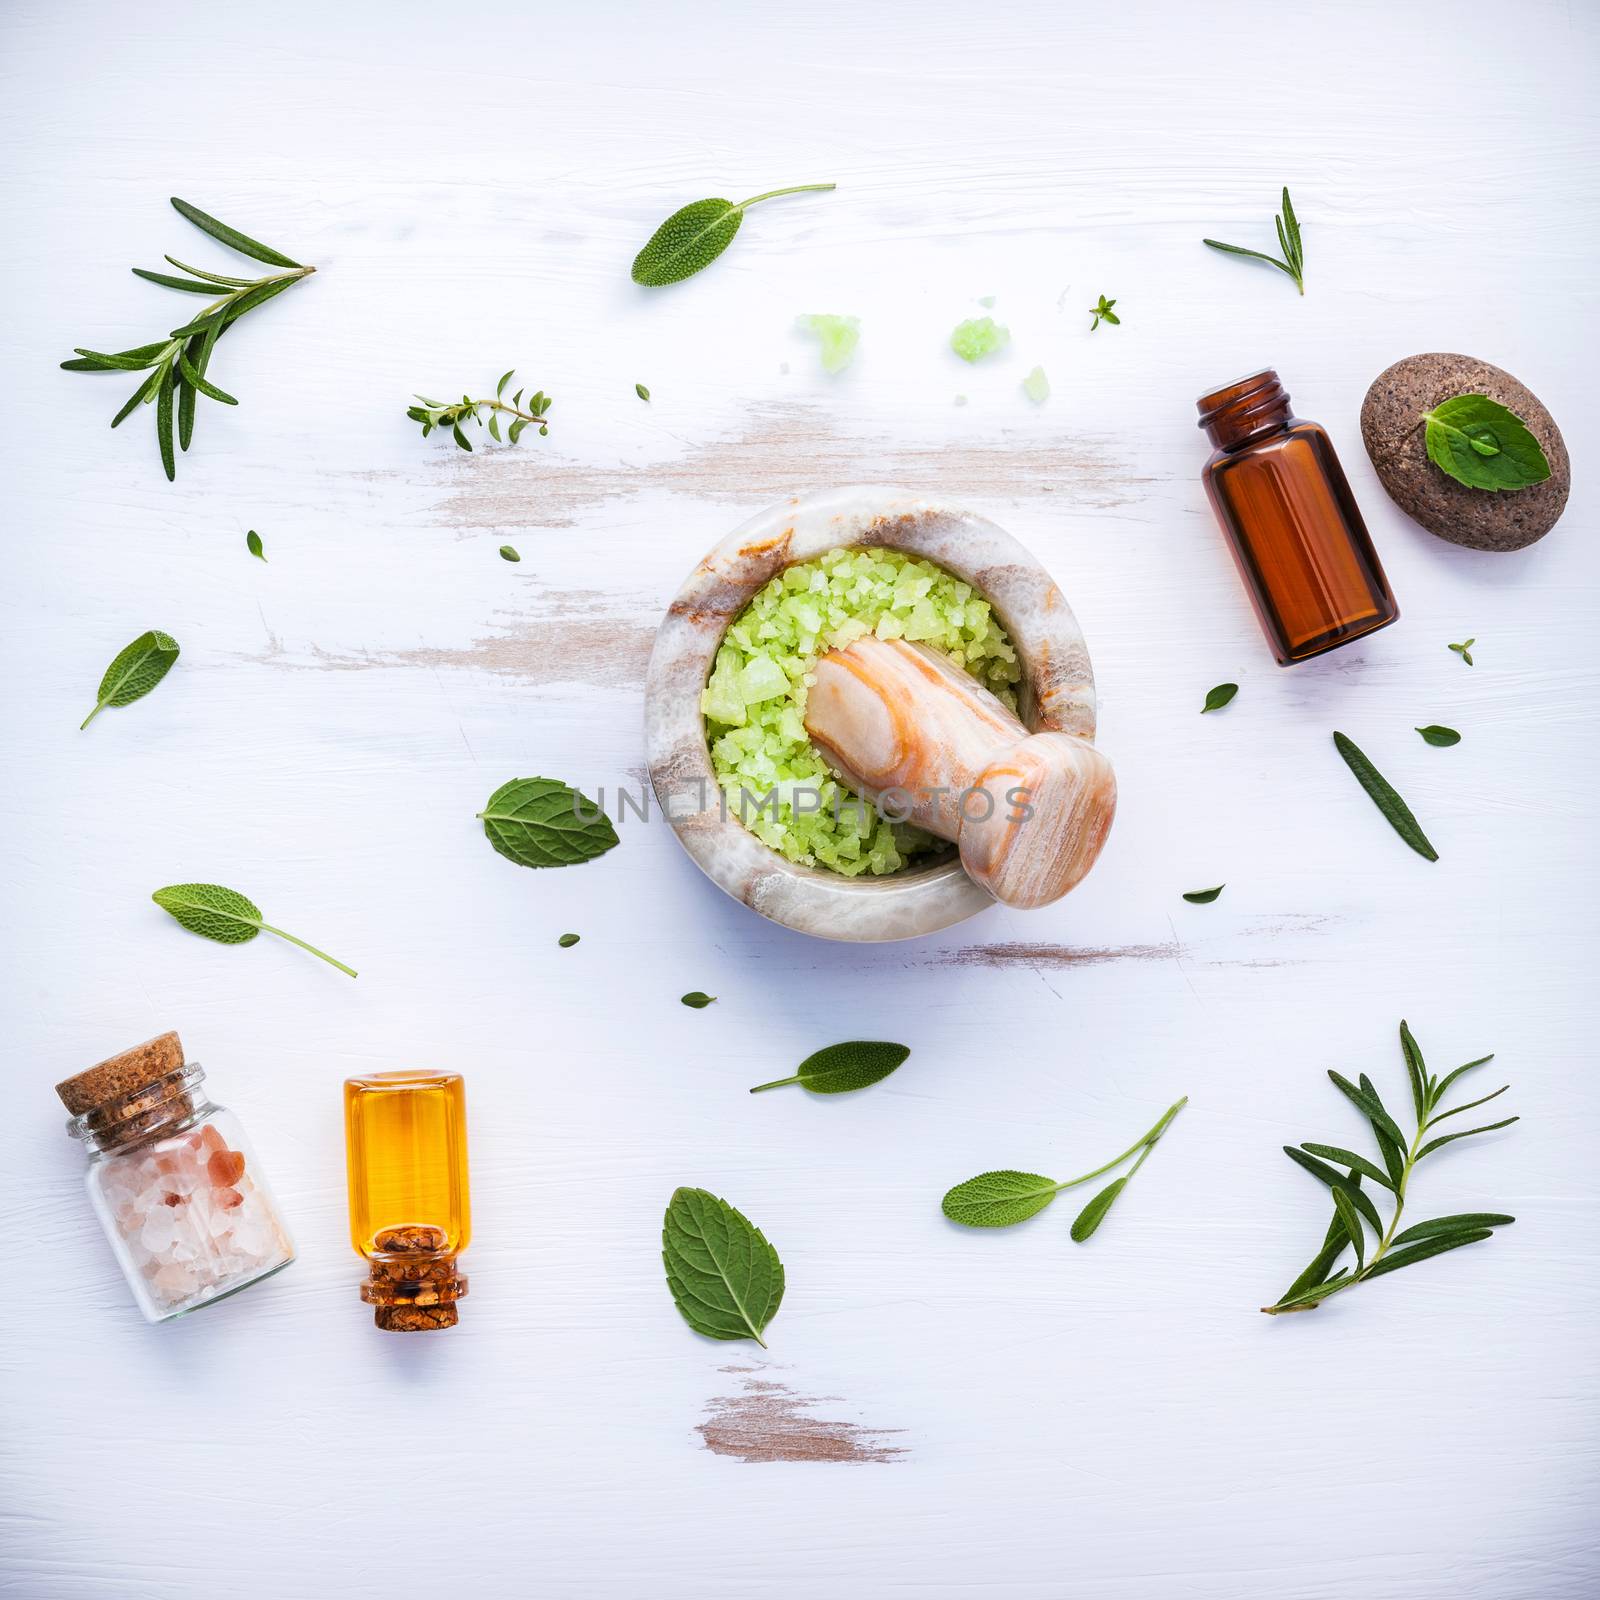 Aromatic sea salt with aromatic herbs . Fresh peppermint ,sage and rosemary. Nature spa ingredients and body scrub. Herbal remedies. Flat lay on white wooden table.